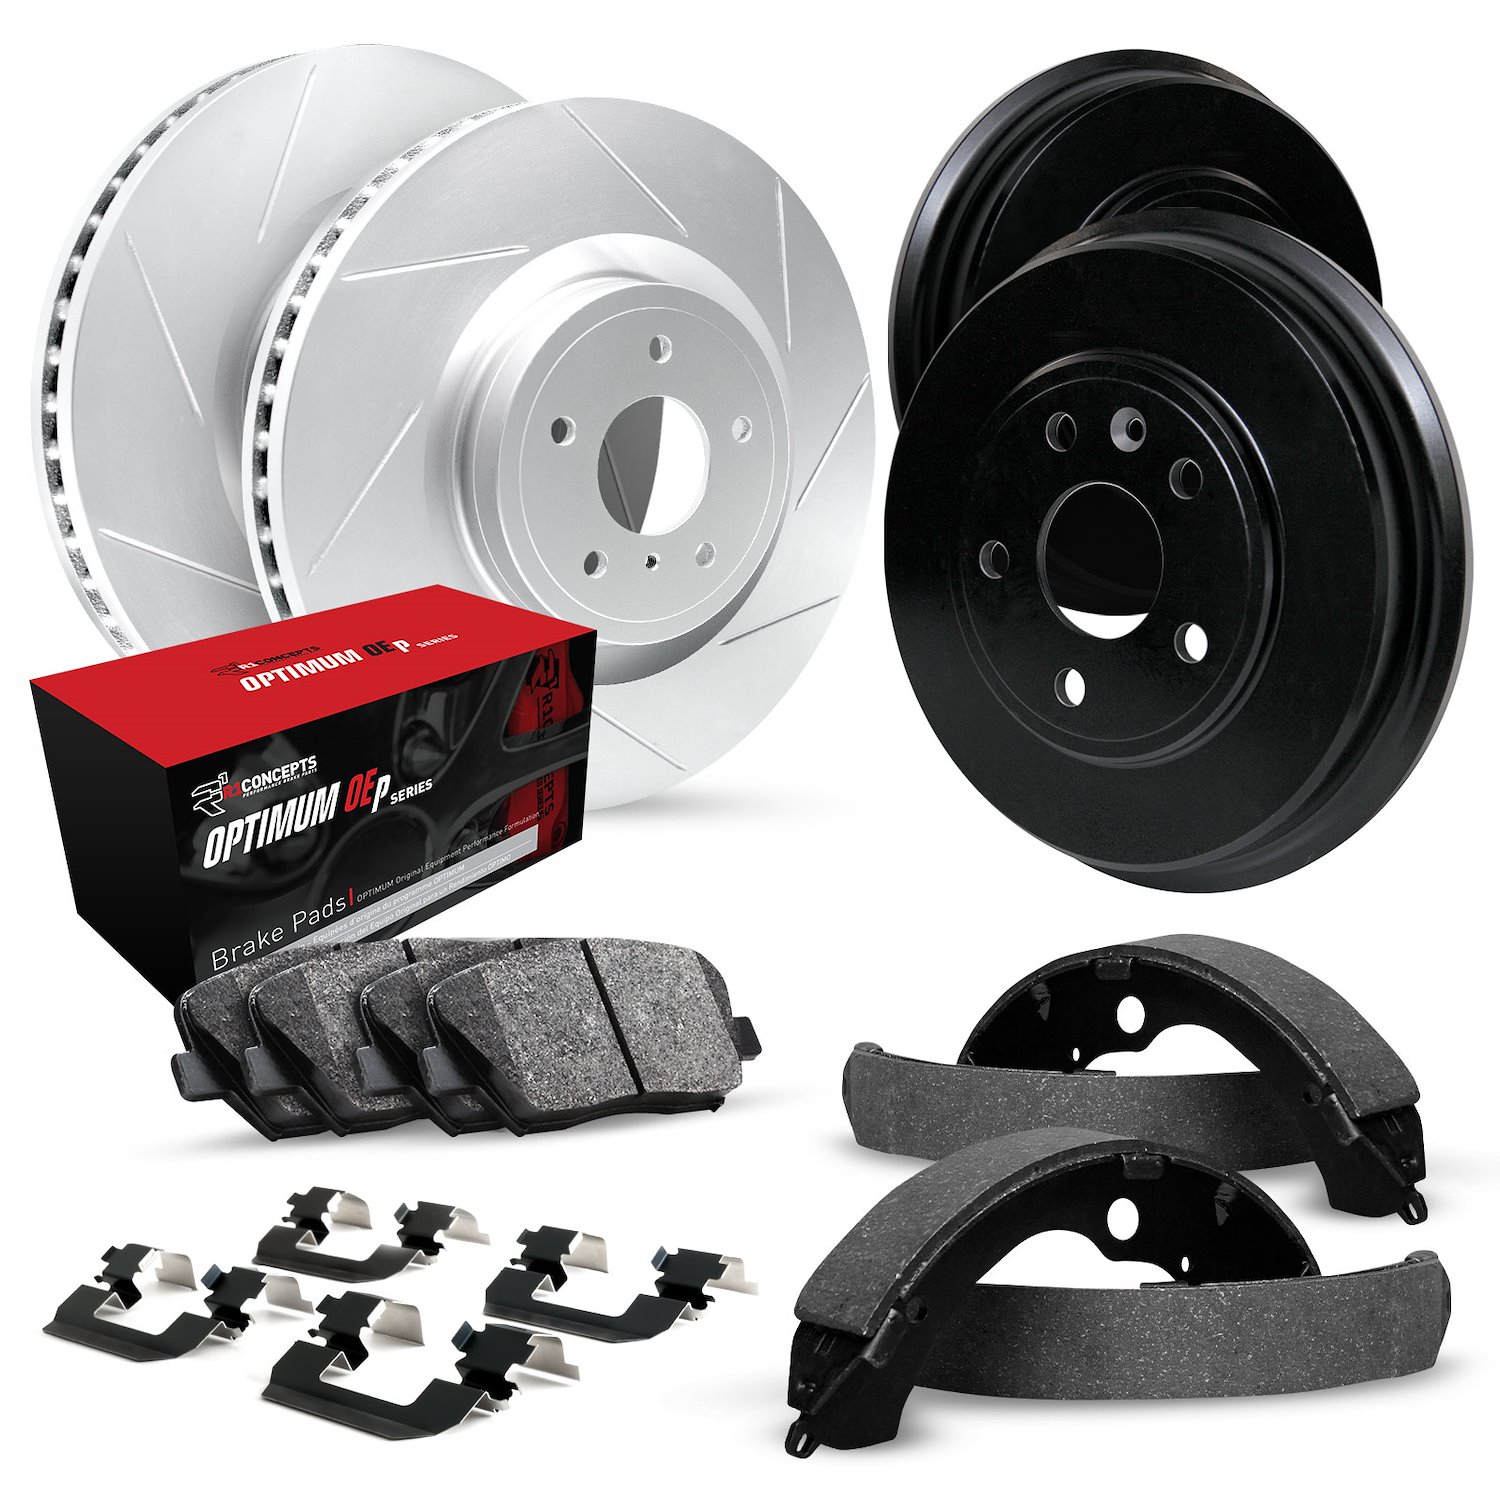 GEO-Carbon Slotted Brake Rotor & Drum Set w/Optimum OE Pads, Shoes, & Hardware, 1984-1994 Ford/Lincoln/Mercury/Mazda